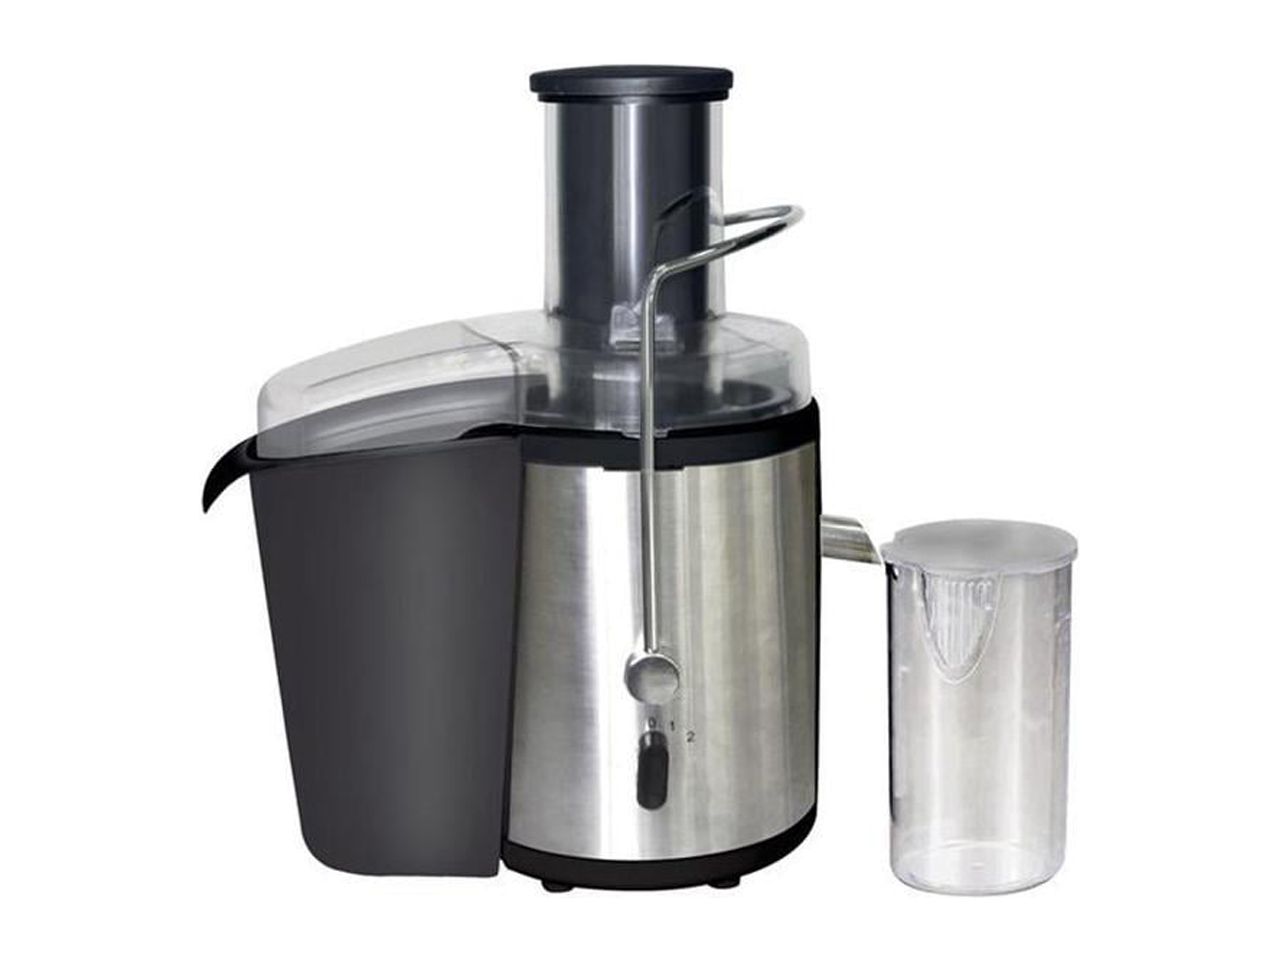 Brentwood Appliances JC-500 2-Speed 800Watt Juice Extractor with Graduated Jar, Stainless Steel - image 1 of 5